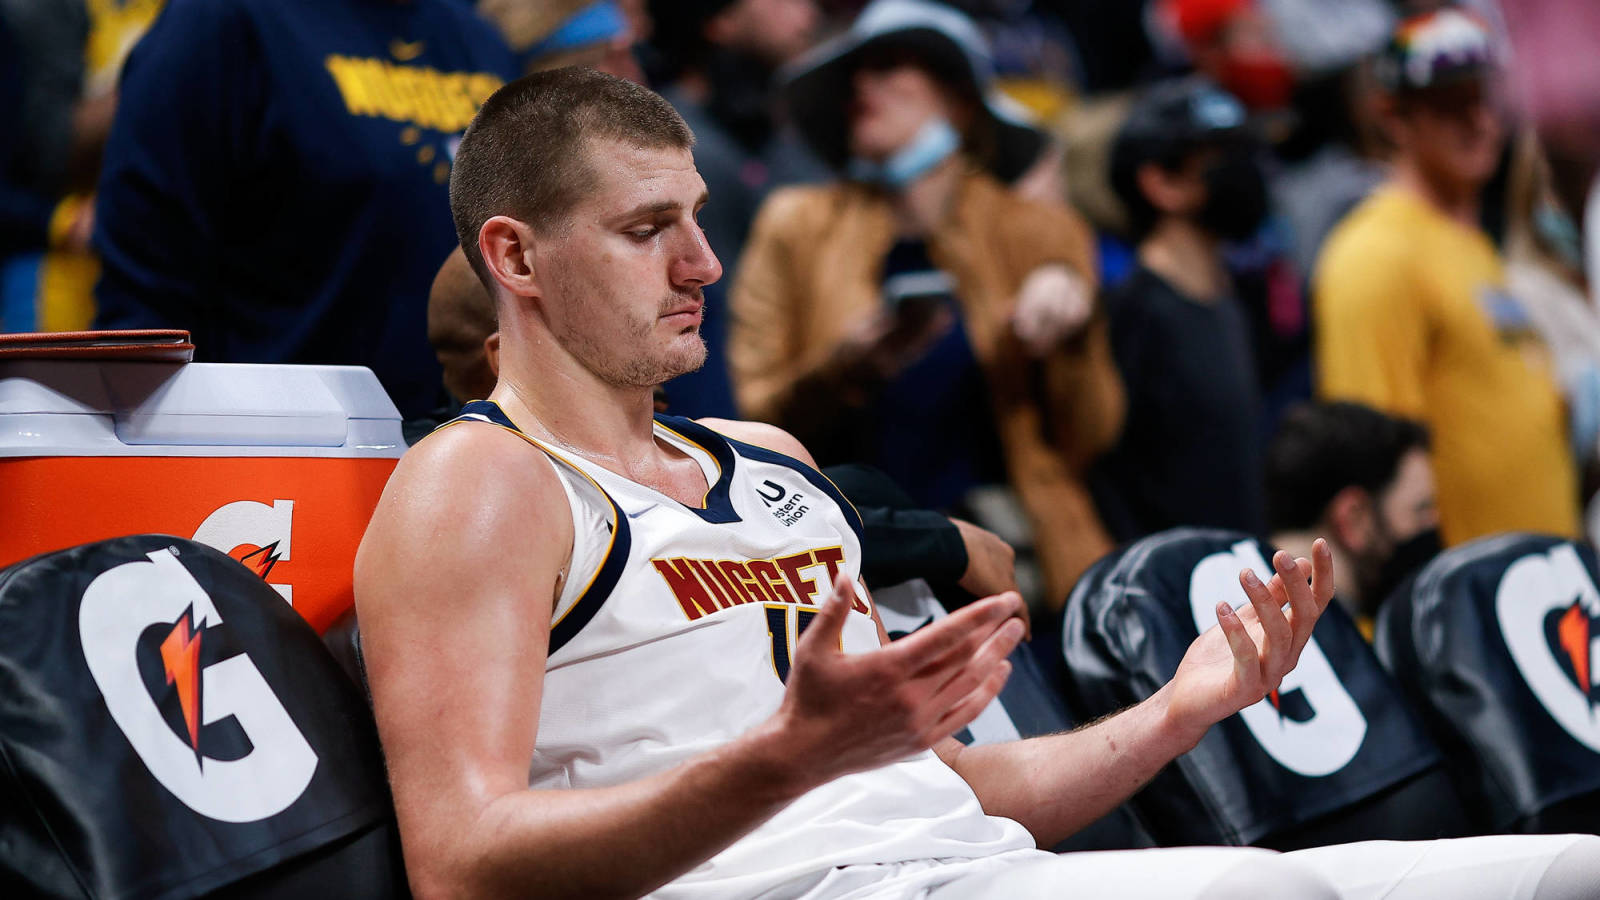 Reigning NBA MVP Nikola Jokic ejected after dirty foul against Miami Heat